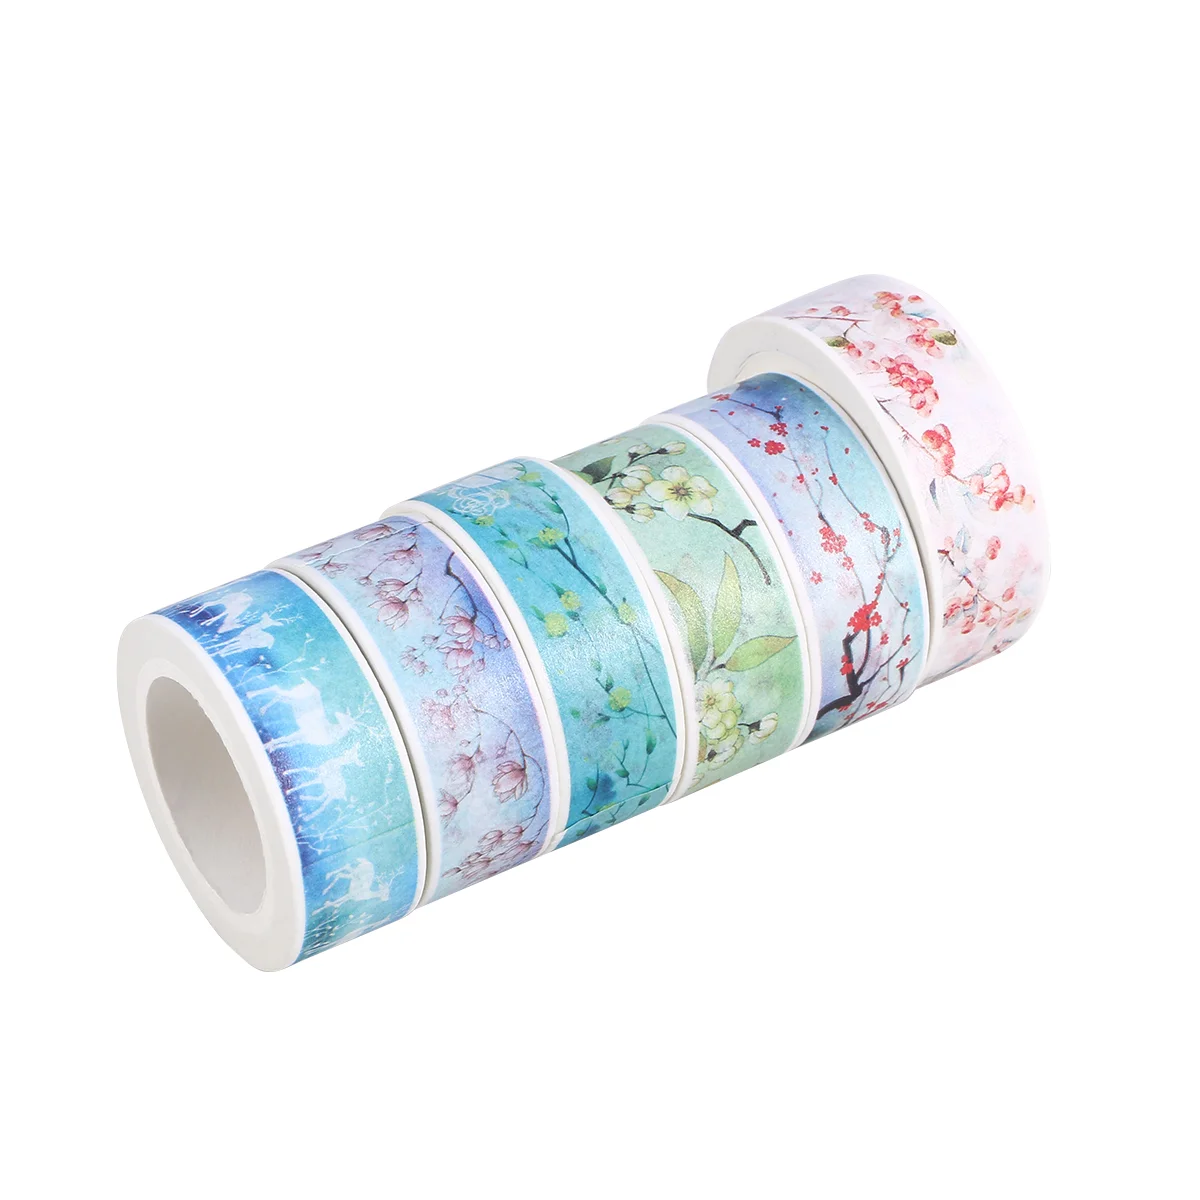 Tape Washi Diy Paper Gift Masking Album Decorative Holiday Photo Decoration Accessories Packaging Flower Sticker Diary Book Duct